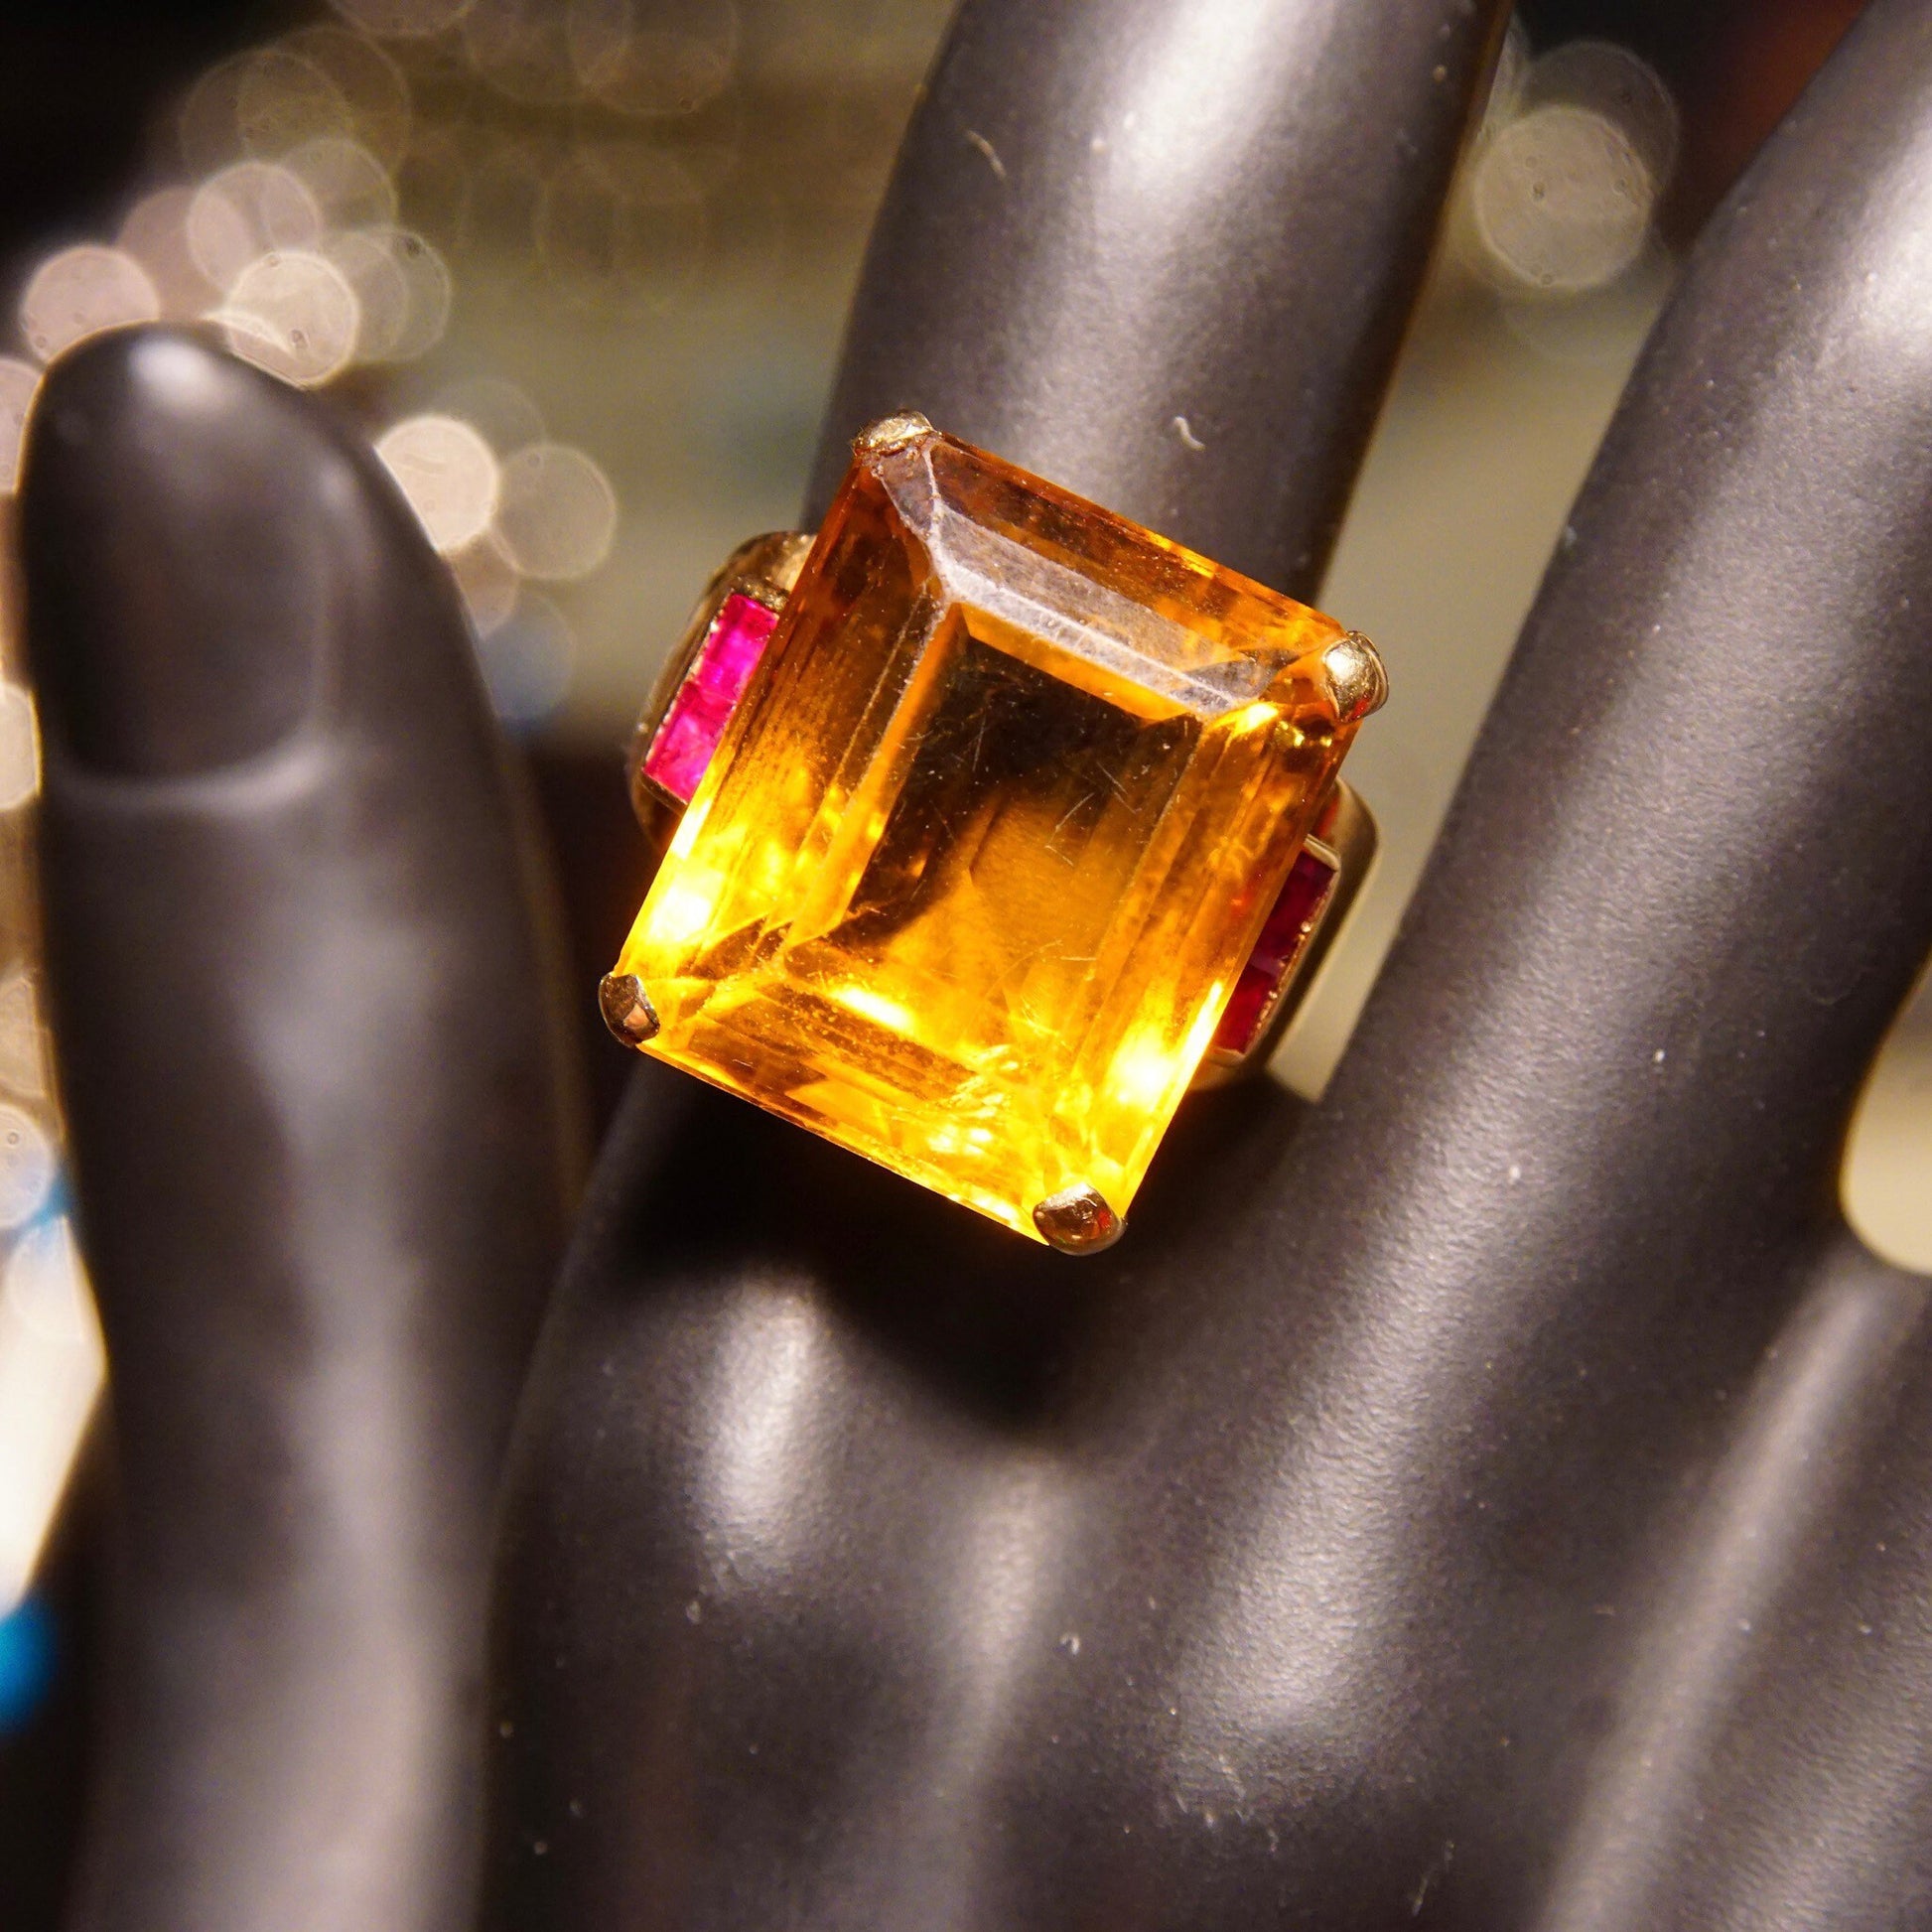 Large emerald-cut citrine gemstone cocktail ring set in 14K yellow gold with ruby accents, estate jewelry, on display held by a mannequin hand.